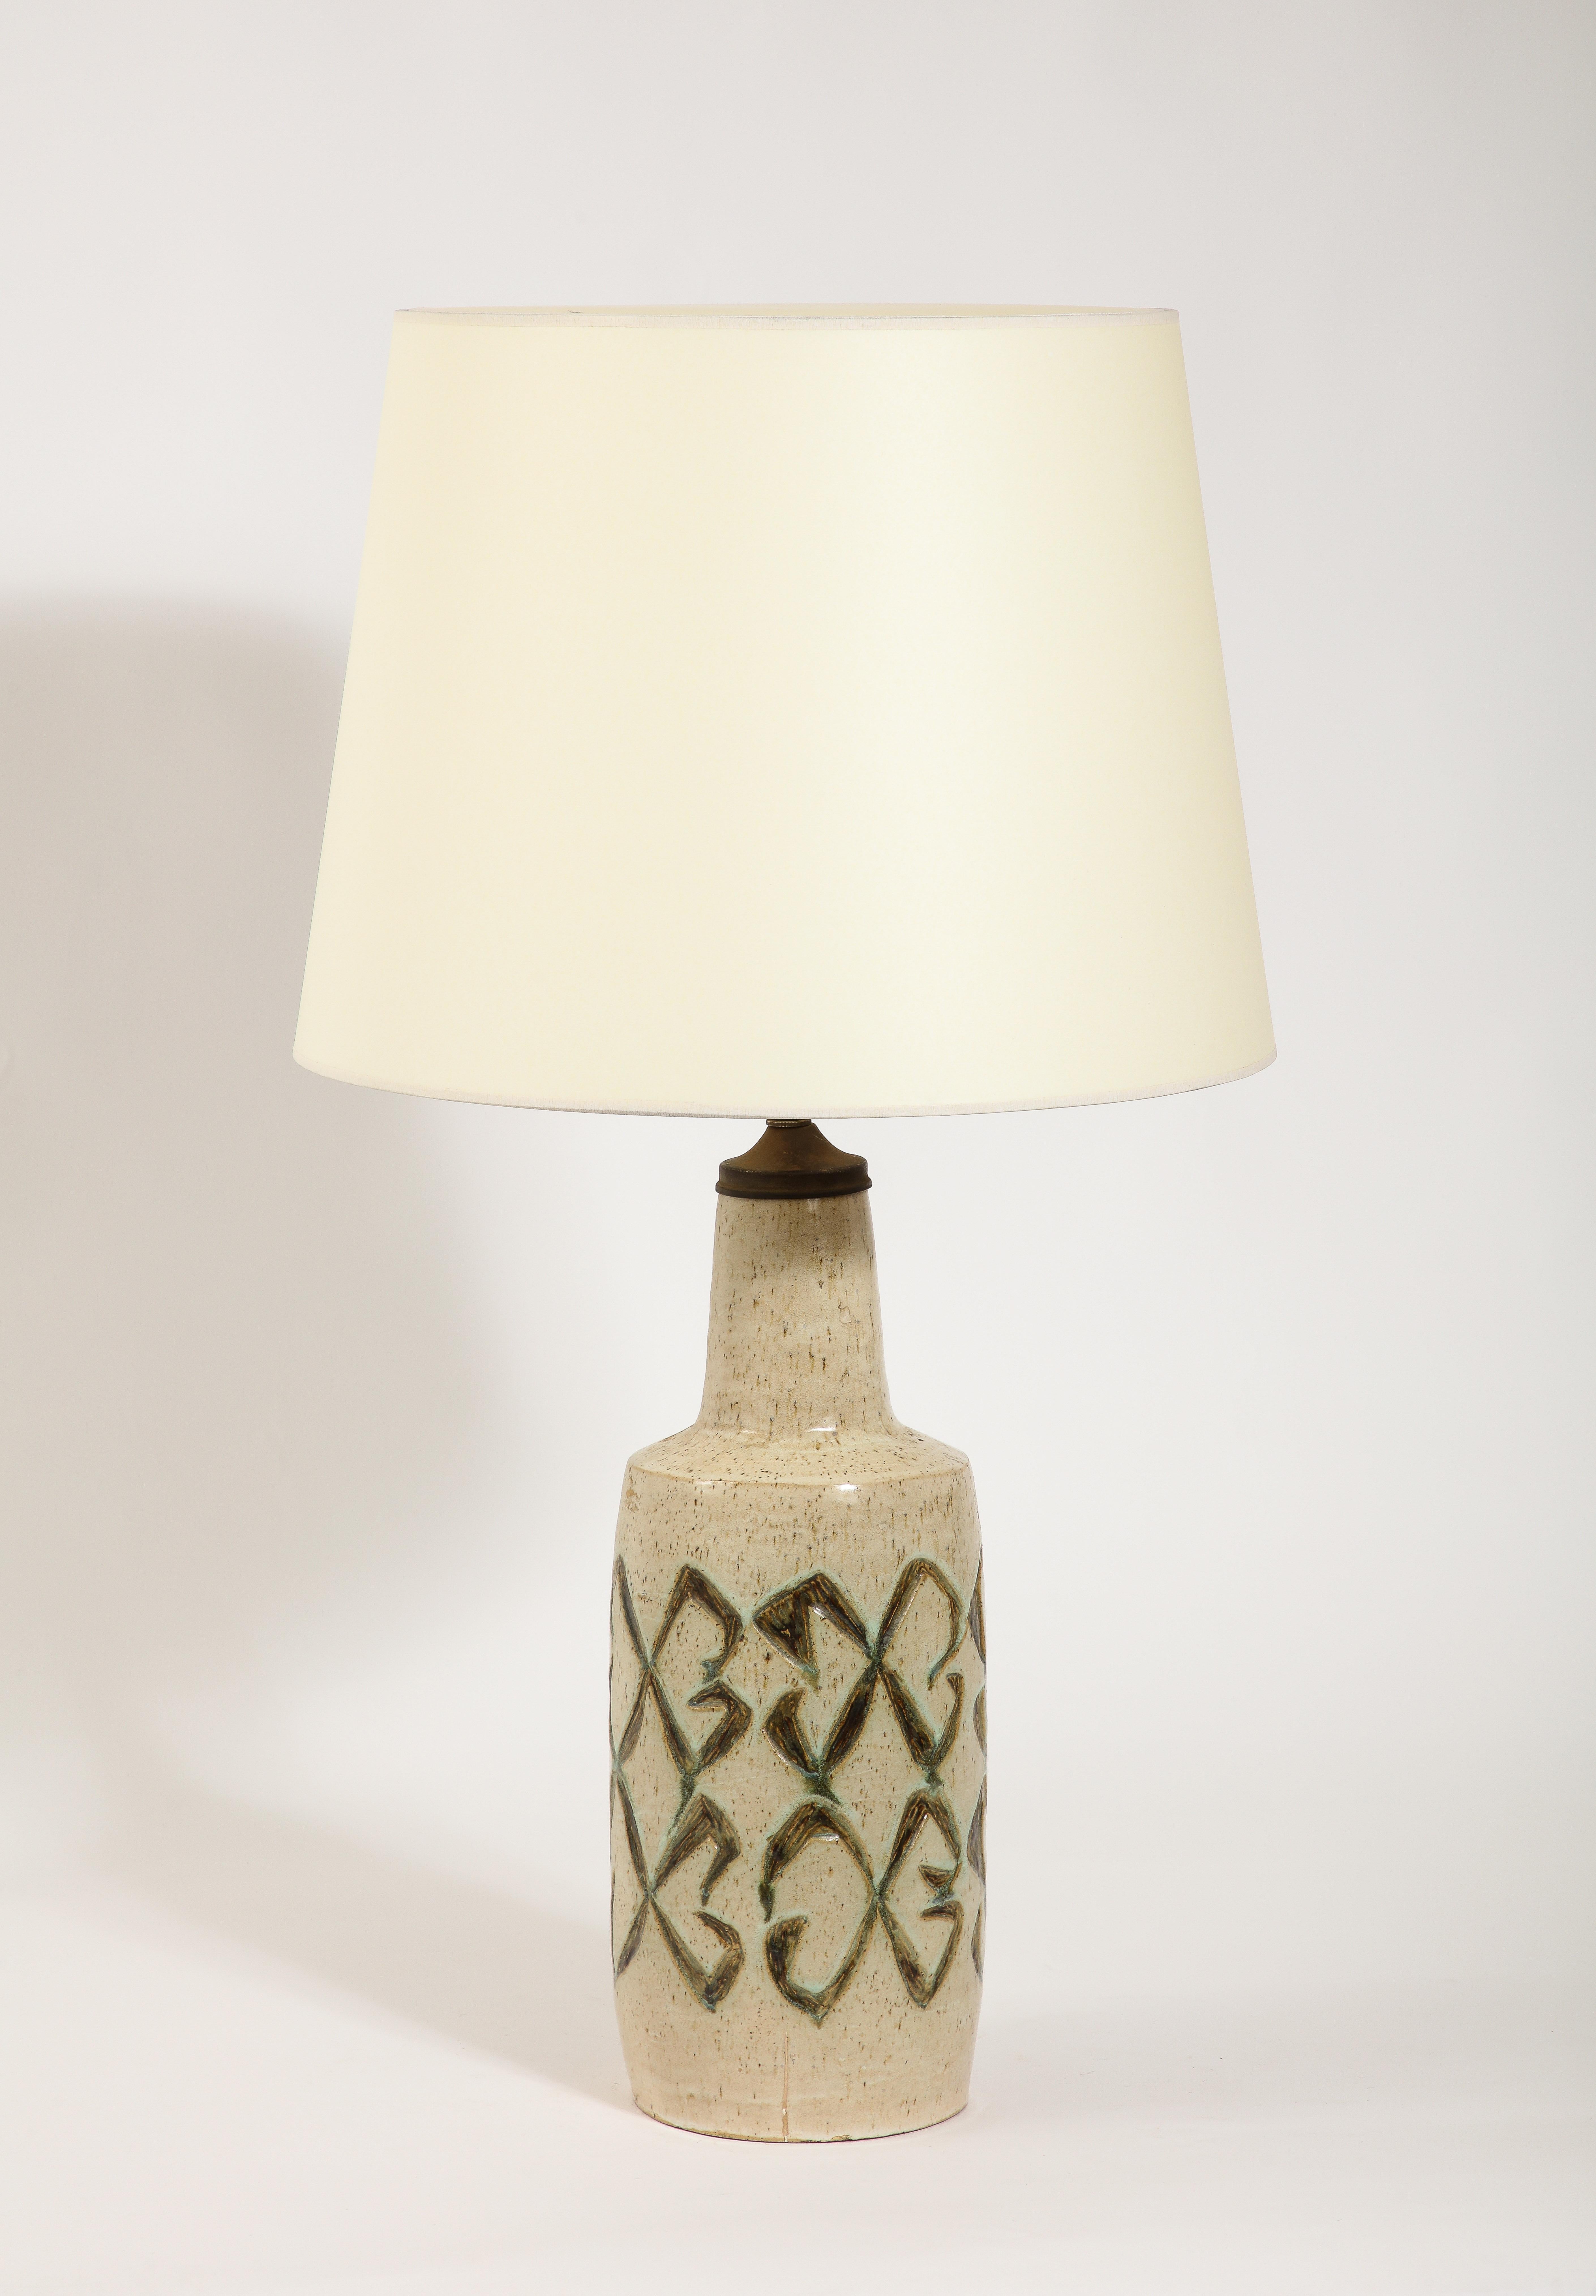 Green & Tan Abstract Pattern Ceramic Lamp, USA 1960's For Sale 6